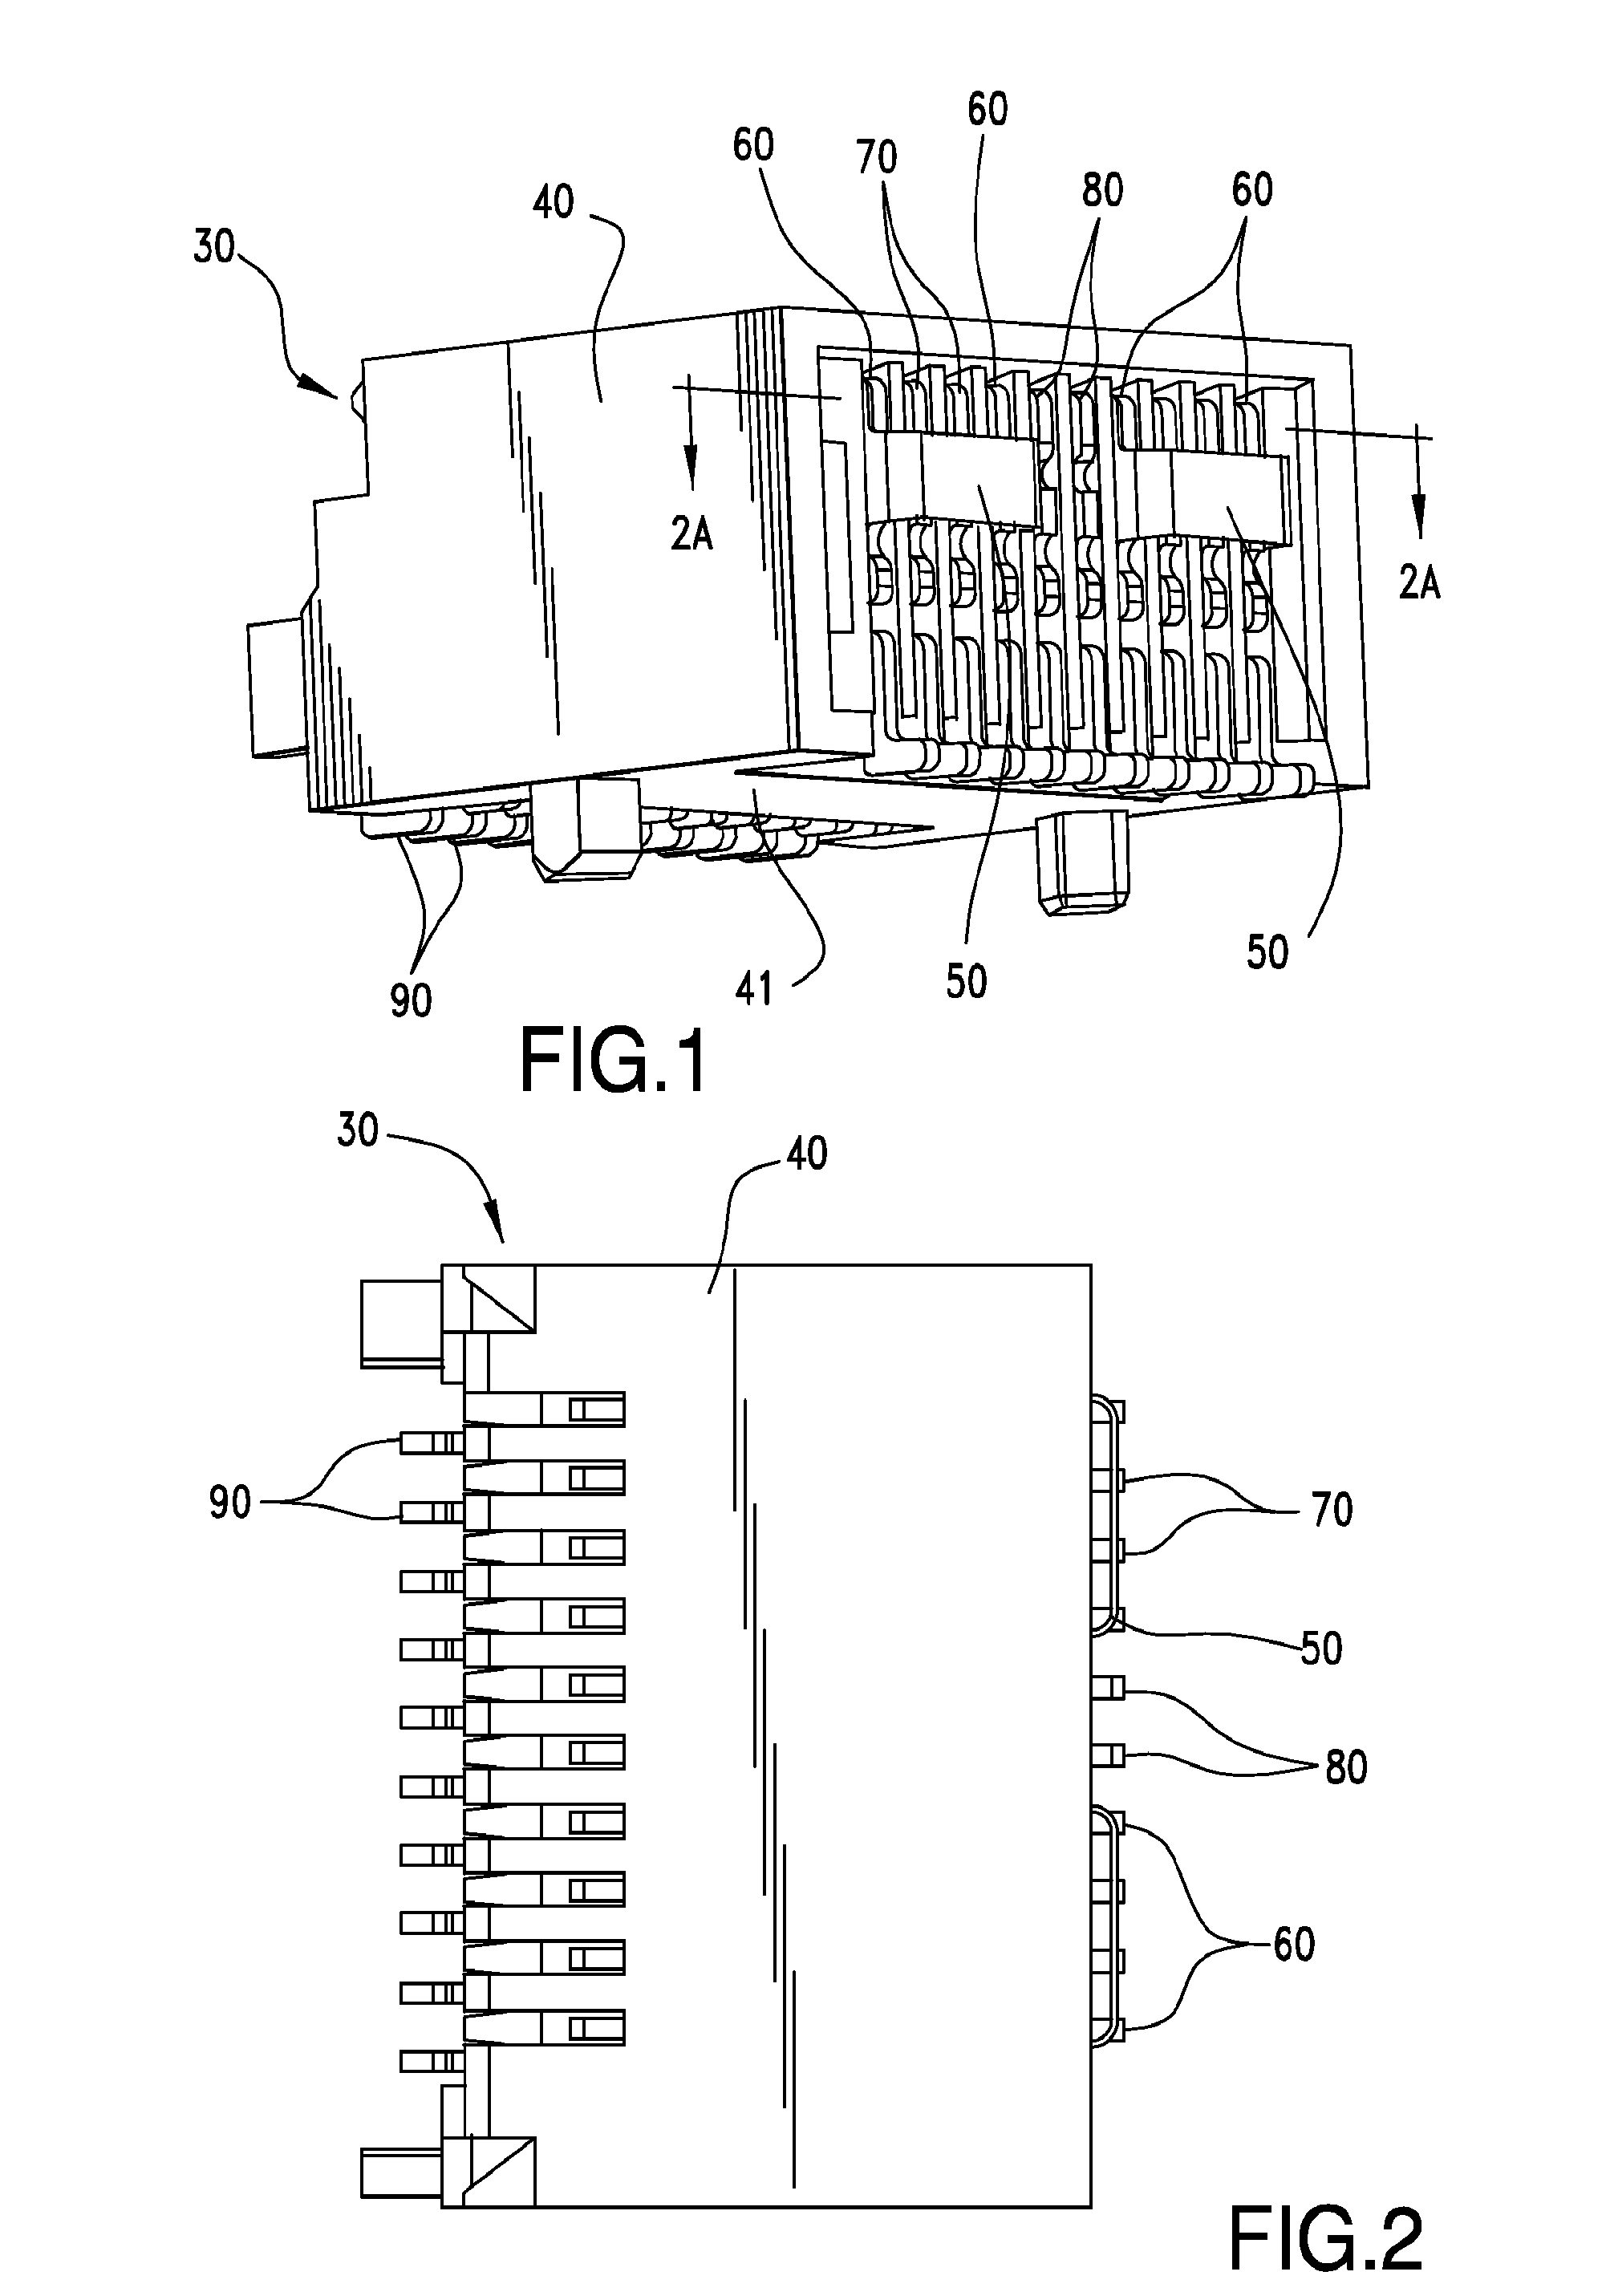 Connector with terminals forming differential pairs